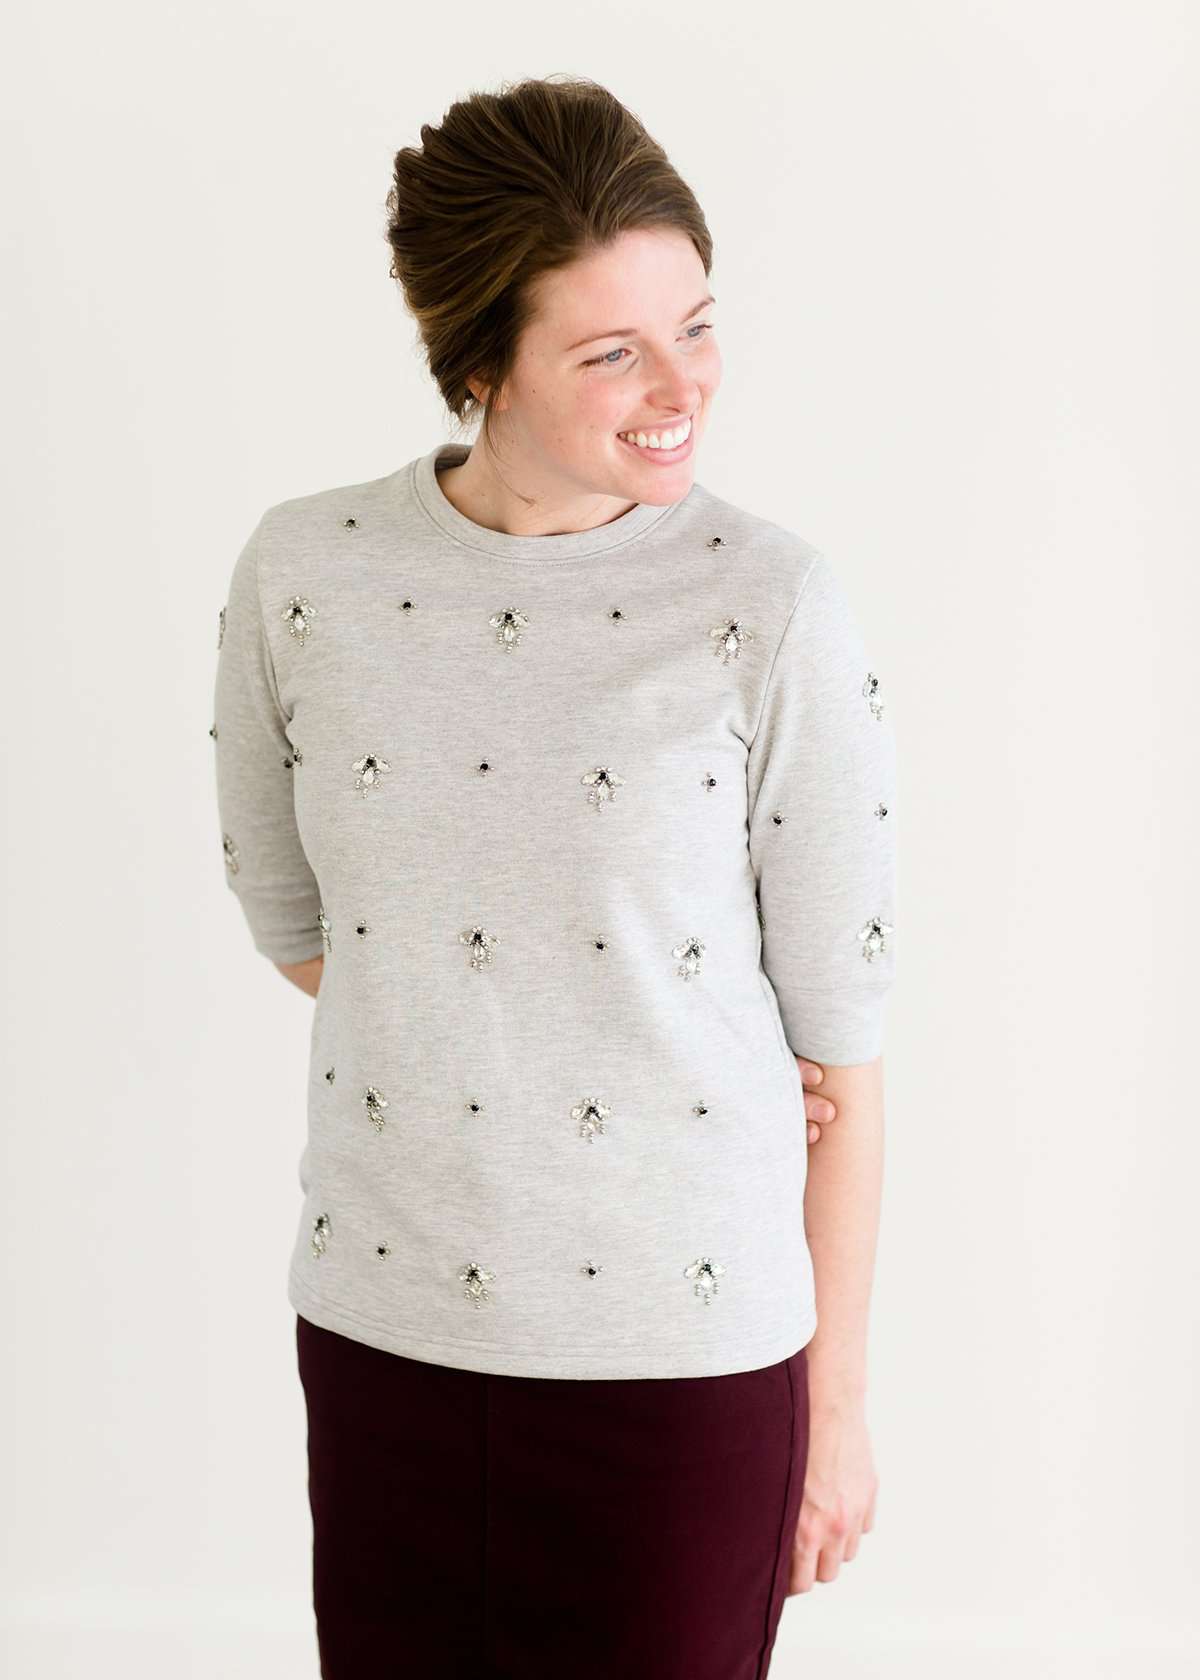 Woman wearing a gray crew neck sweatshirt that is half sleeves and has jewel designs on it.